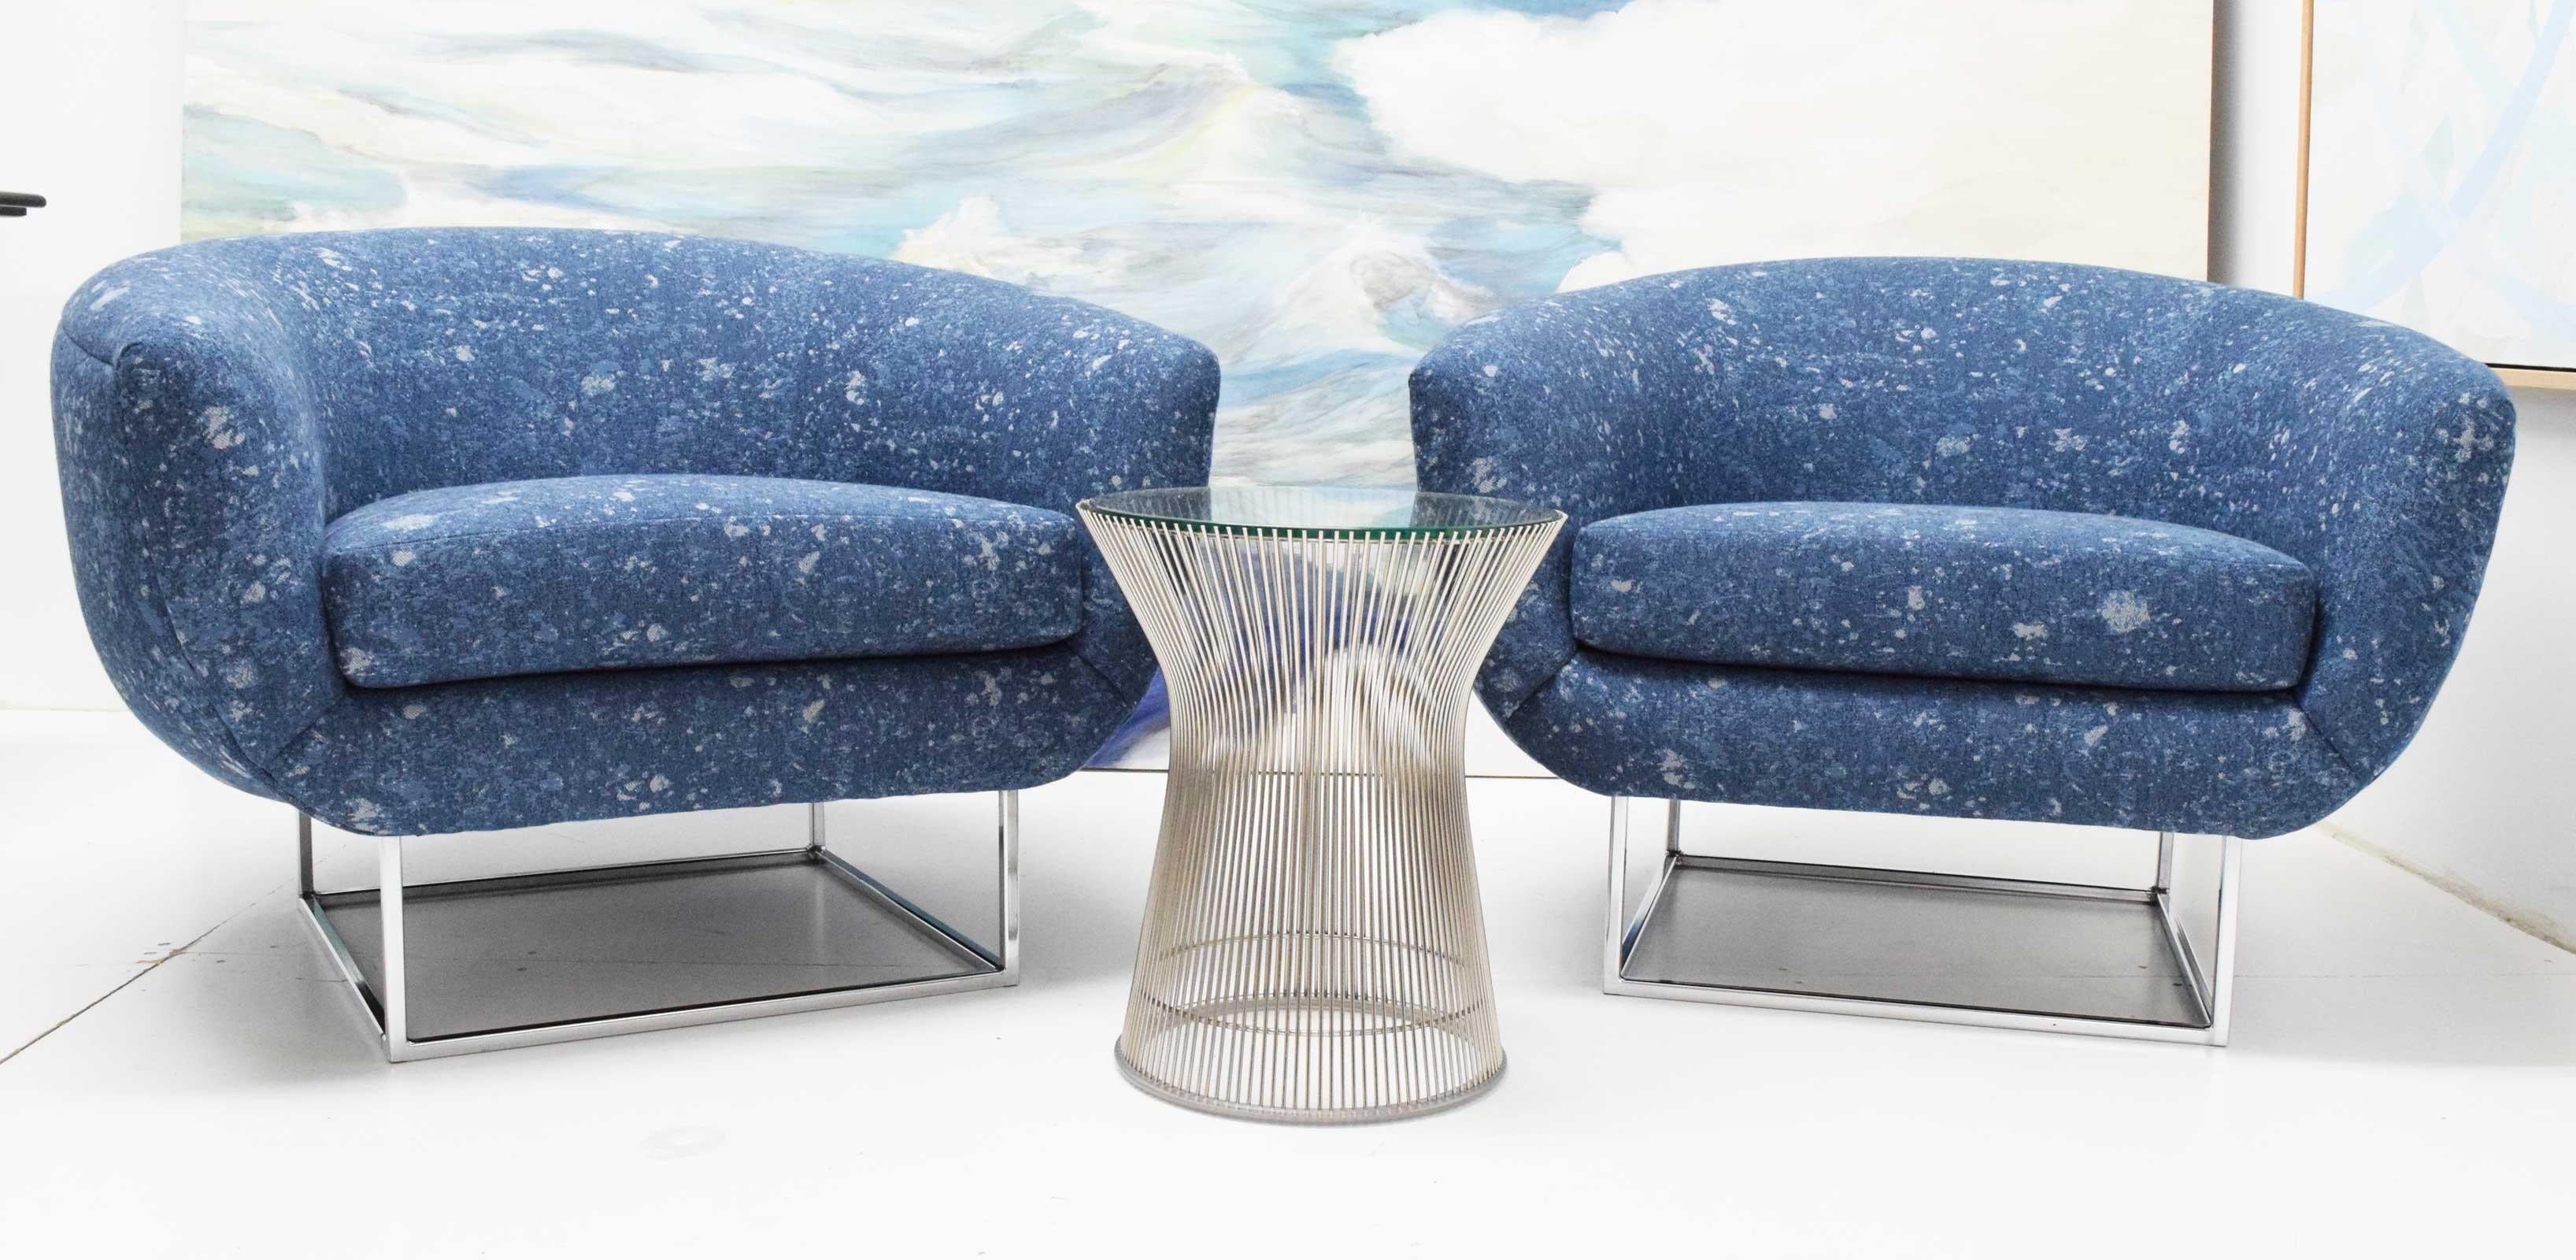 Milo Baughman 1970s Lounge Chairs in Blue Upholstery by Donghia In Good Condition For Sale In Dallas, TX